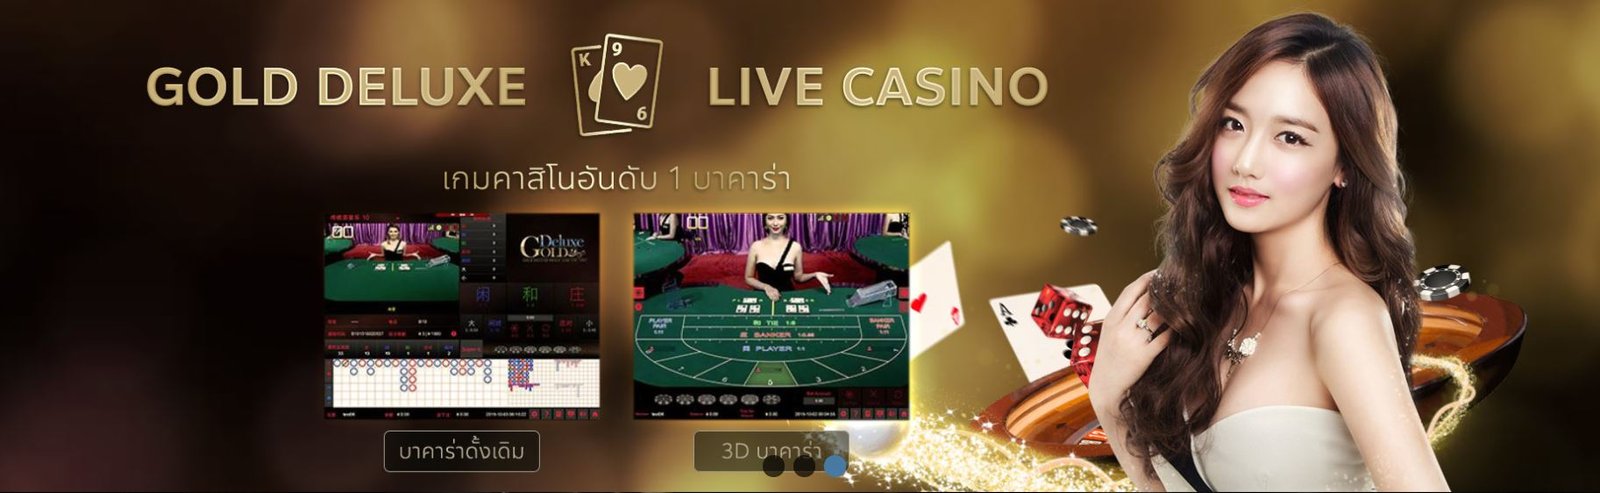 Gold Deluxe Casino GD3